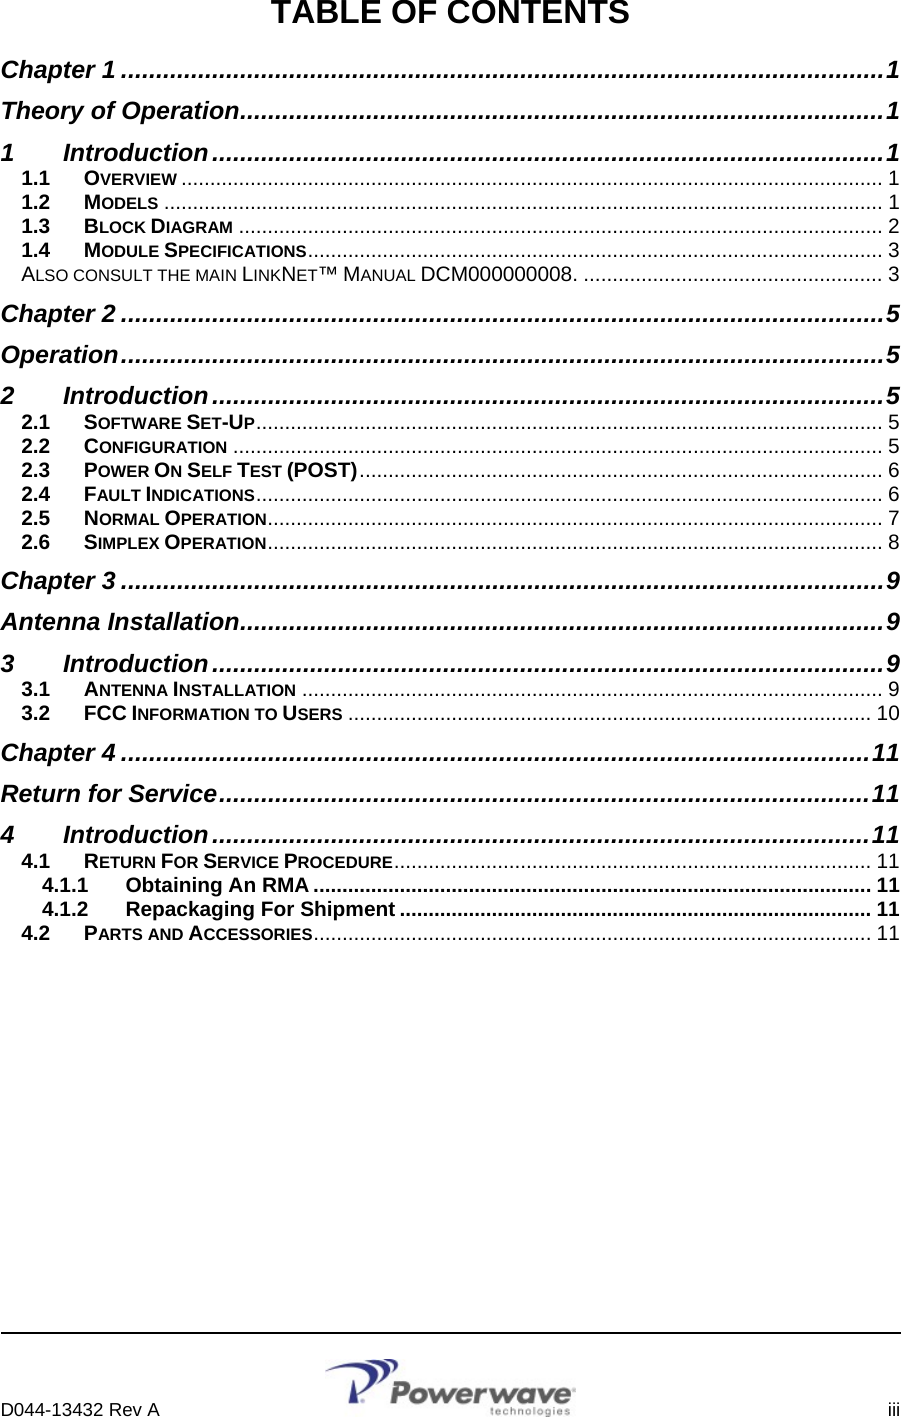      D044-13432 Rev A    iii  TABLE OF CONTENTS Chapter 1 .............................................................................................................1 Theory of Operation............................................................................................1 1 Introduction................................................................................................1 1.1 OVERVIEW .......................................................................................................................... 1 1.2 MODELS ............................................................................................................................. 1 1.3 BLOCK DIAGRAM ................................................................................................................ 2 1.4 MODULE SPECIFICATIONS.................................................................................................... 3 ALSO CONSULT THE MAIN LINKNET™ MANUAL DCM000000008. .................................................... 3 Chapter 2 .............................................................................................................5 Operation.............................................................................................................5 2 Introduction................................................................................................5 2.1 SOFTWARE SET-UP............................................................................................................. 5 2.2 CONFIGURATION ................................................................................................................. 5 2.3 POWER ON SELF TEST (POST)........................................................................................... 6 2.4 FAULT INDICATIONS............................................................................................................. 6 2.5 NORMAL OPERATION........................................................................................................... 7 2.6 SIMPLEX OPERATION........................................................................................................... 8 Chapter 3 .............................................................................................................9 Antenna Installation............................................................................................9 3 Introduction................................................................................................9 3.1 ANTENNA INSTALLATION ..................................................................................................... 9 3.2 FCC INFORMATION TO USERS ........................................................................................... 10 Chapter 4 ...........................................................................................................11 Return for Service.............................................................................................11 4 Introduction..............................................................................................11 4.1 RETURN FOR SERVICE PROCEDURE................................................................................... 11 4.1.1 Obtaining An RMA ................................................................................................. 11 4.1.2 Repackaging For Shipment .................................................................................. 11 4.2 PARTS AND ACCESSORIES................................................................................................. 11        